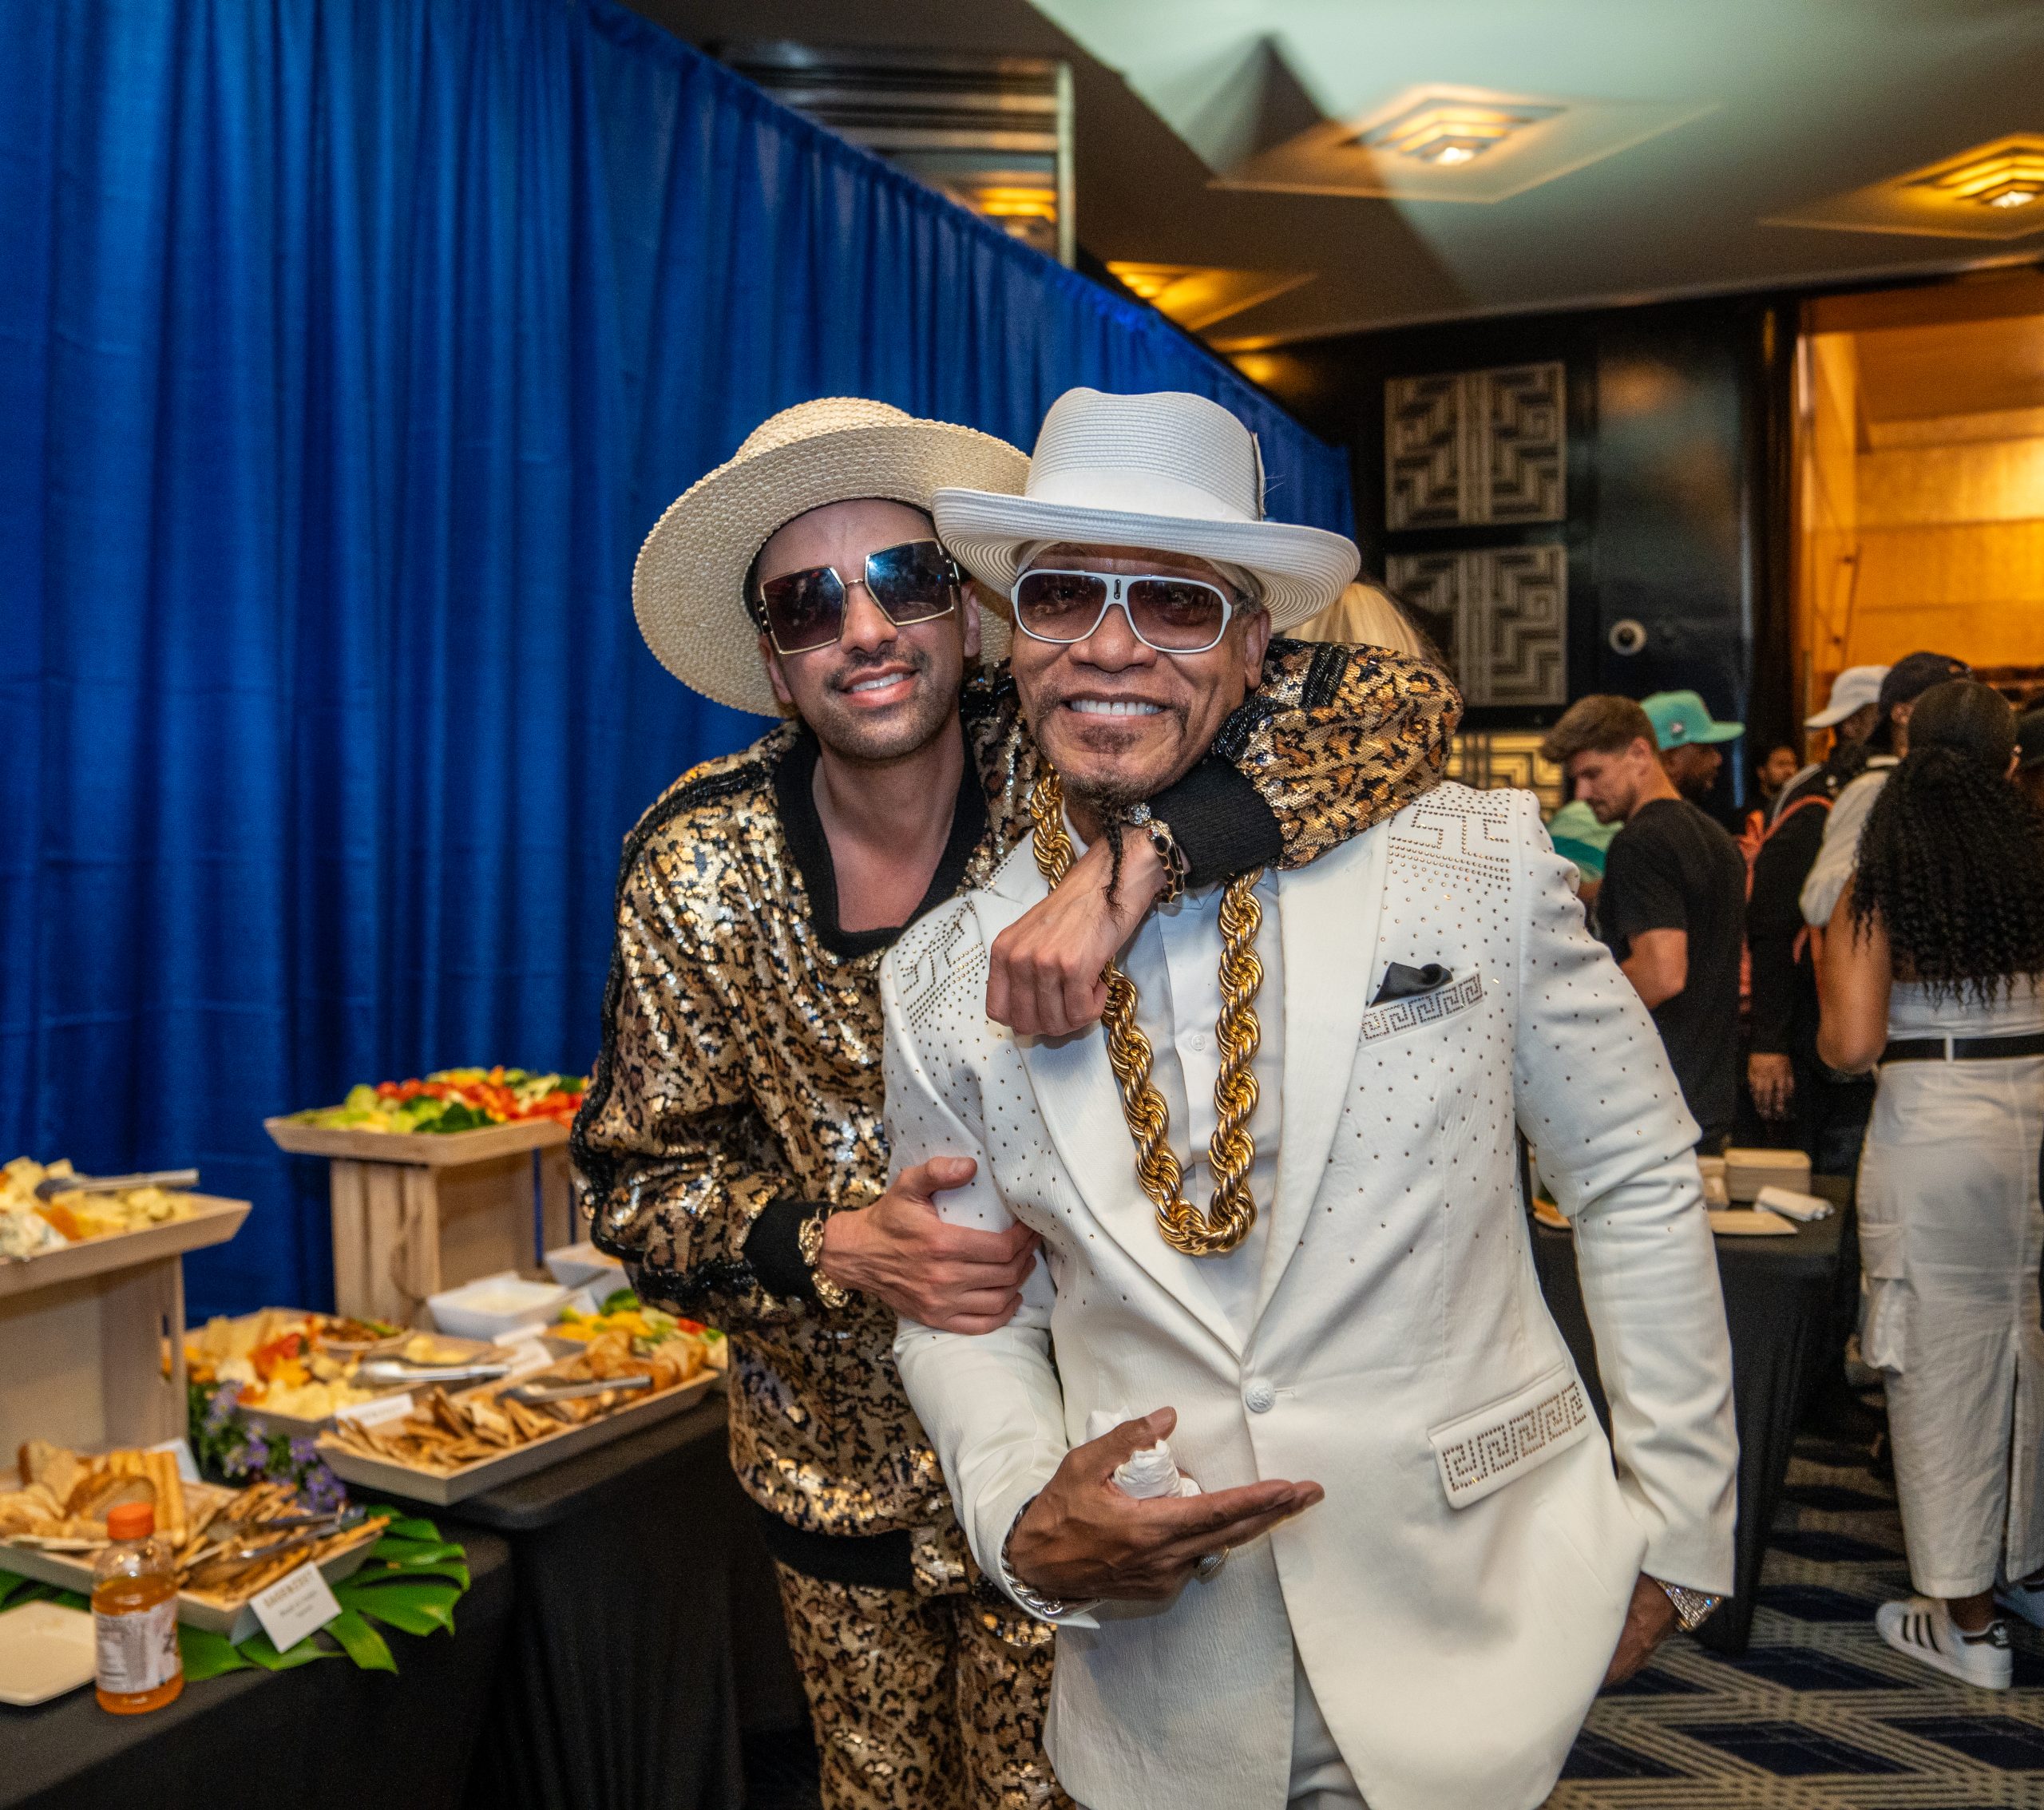 DJ Cassidy + Grandmaster Melle Mel - Martell Cognac, The Black Promoters Collective, and Power 105.1 present DJ Cassidy's Pass The Mic LIVE at Radio City Music Hall in NYC